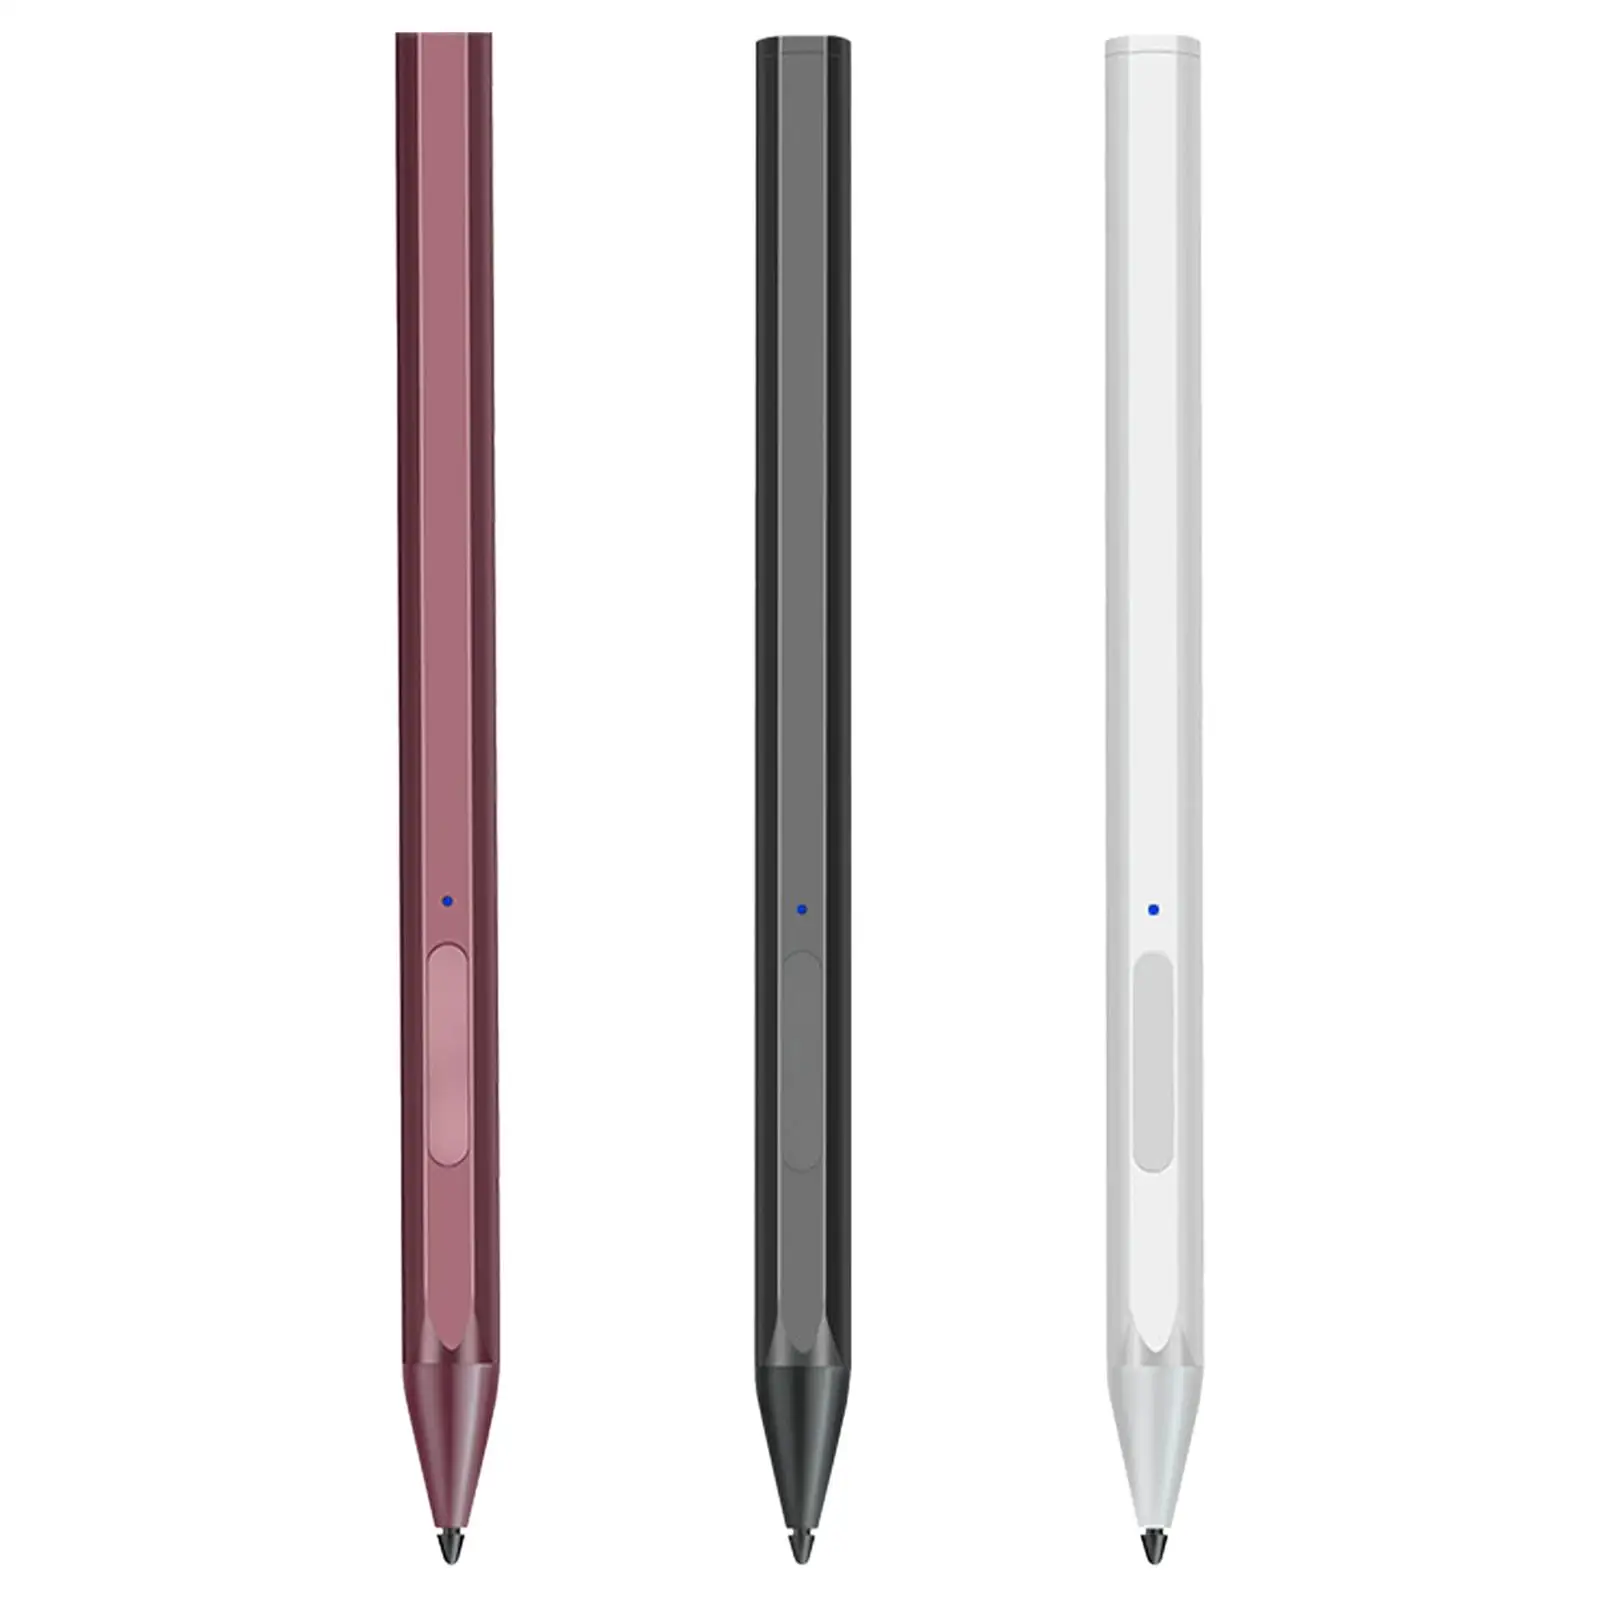 Stylus Pen Quick Charge 120mAh with 3x Pen Tips Portable Wireless Connection for Surface 3 4 5 6 7